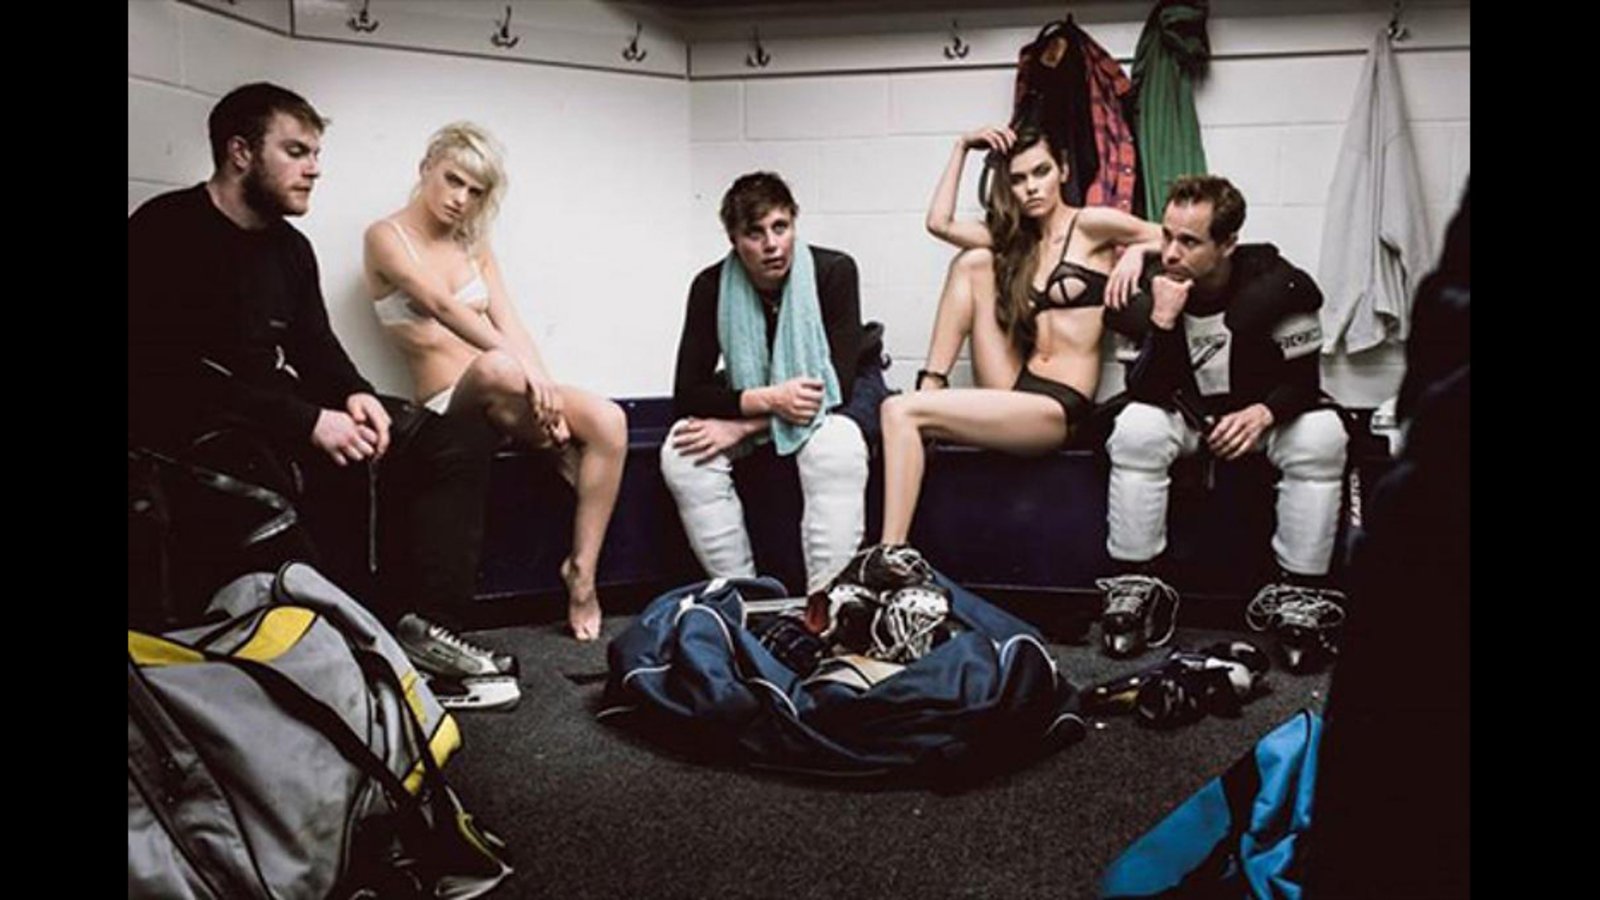 Must See: Lingerie company releases hockey-themed line 